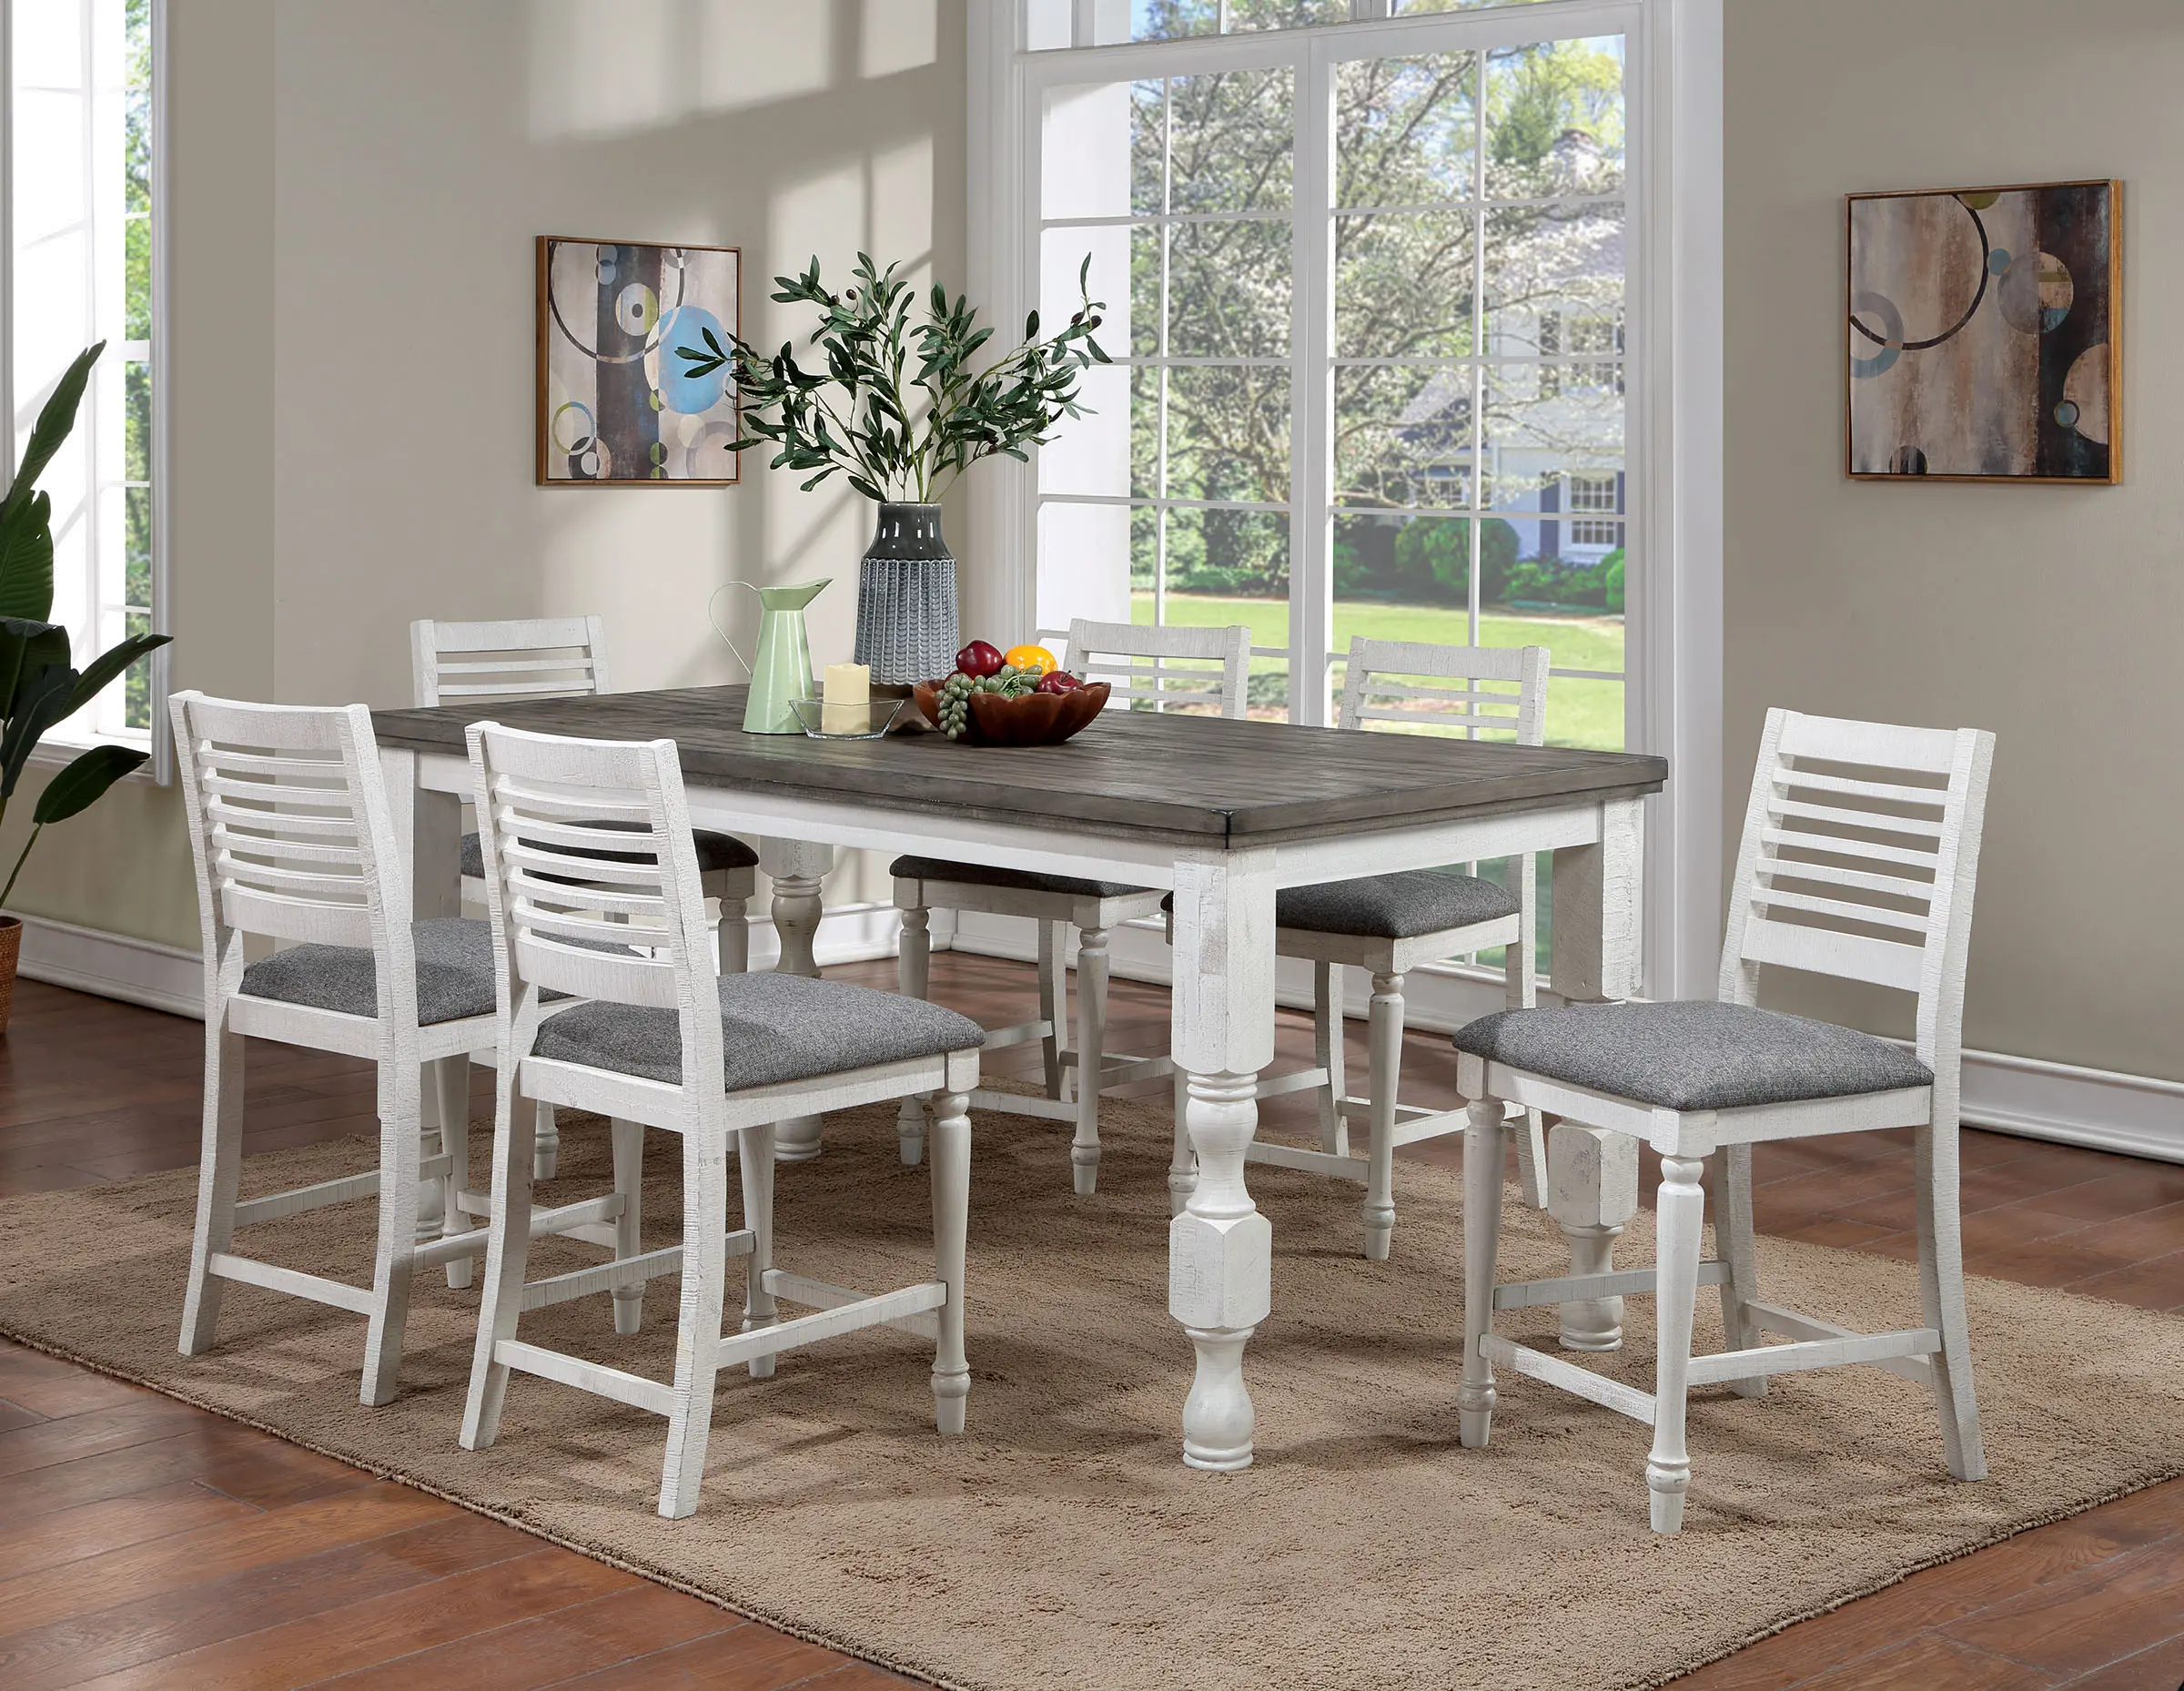 Clabria White and Gray 5 Piece Counter Height Dining Set